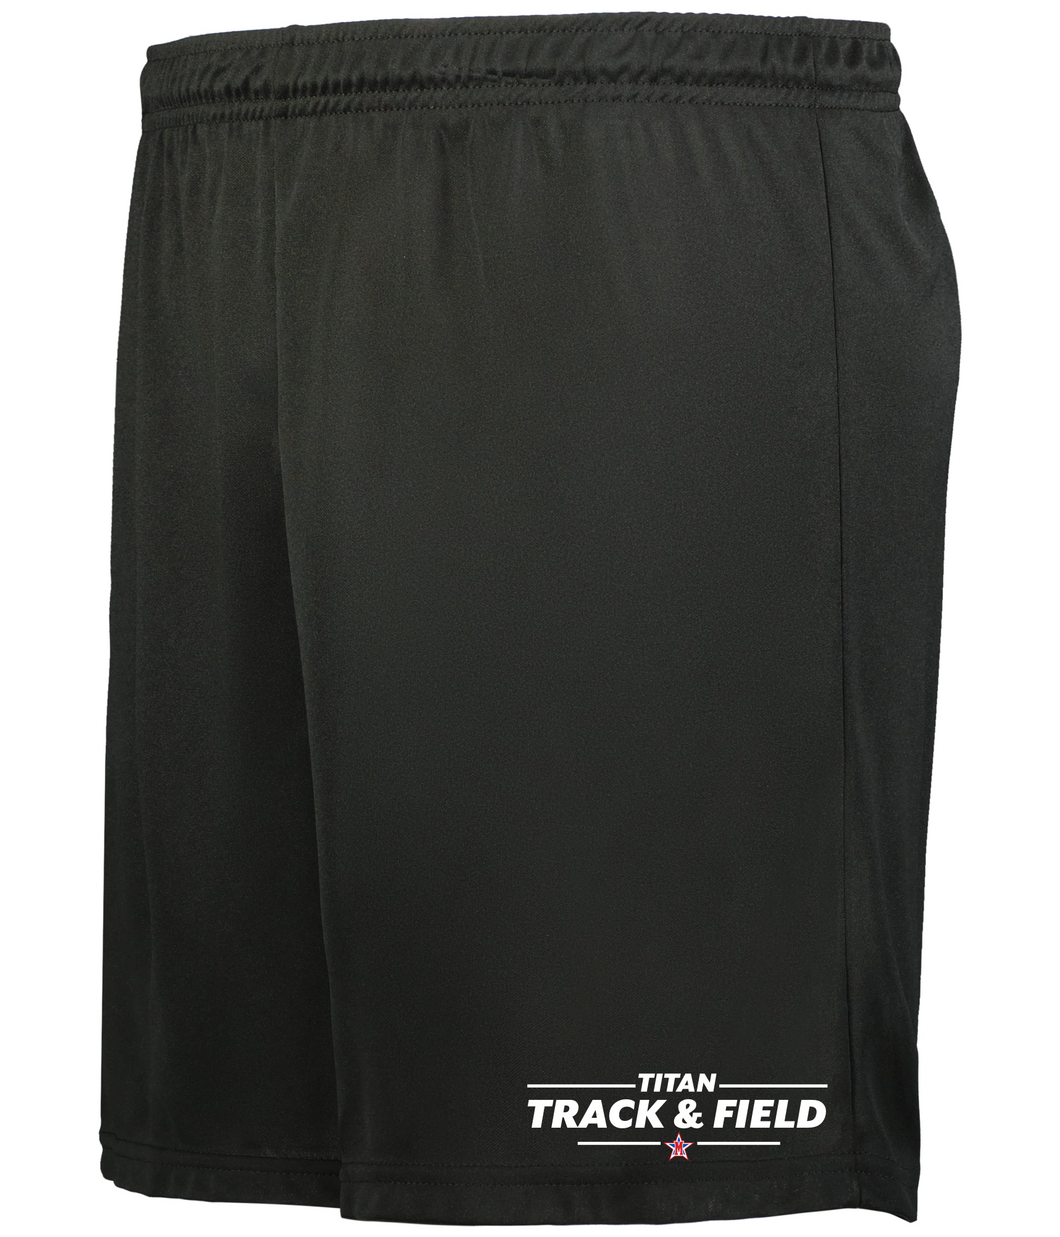 McDowell Titans Track and Field Shorts